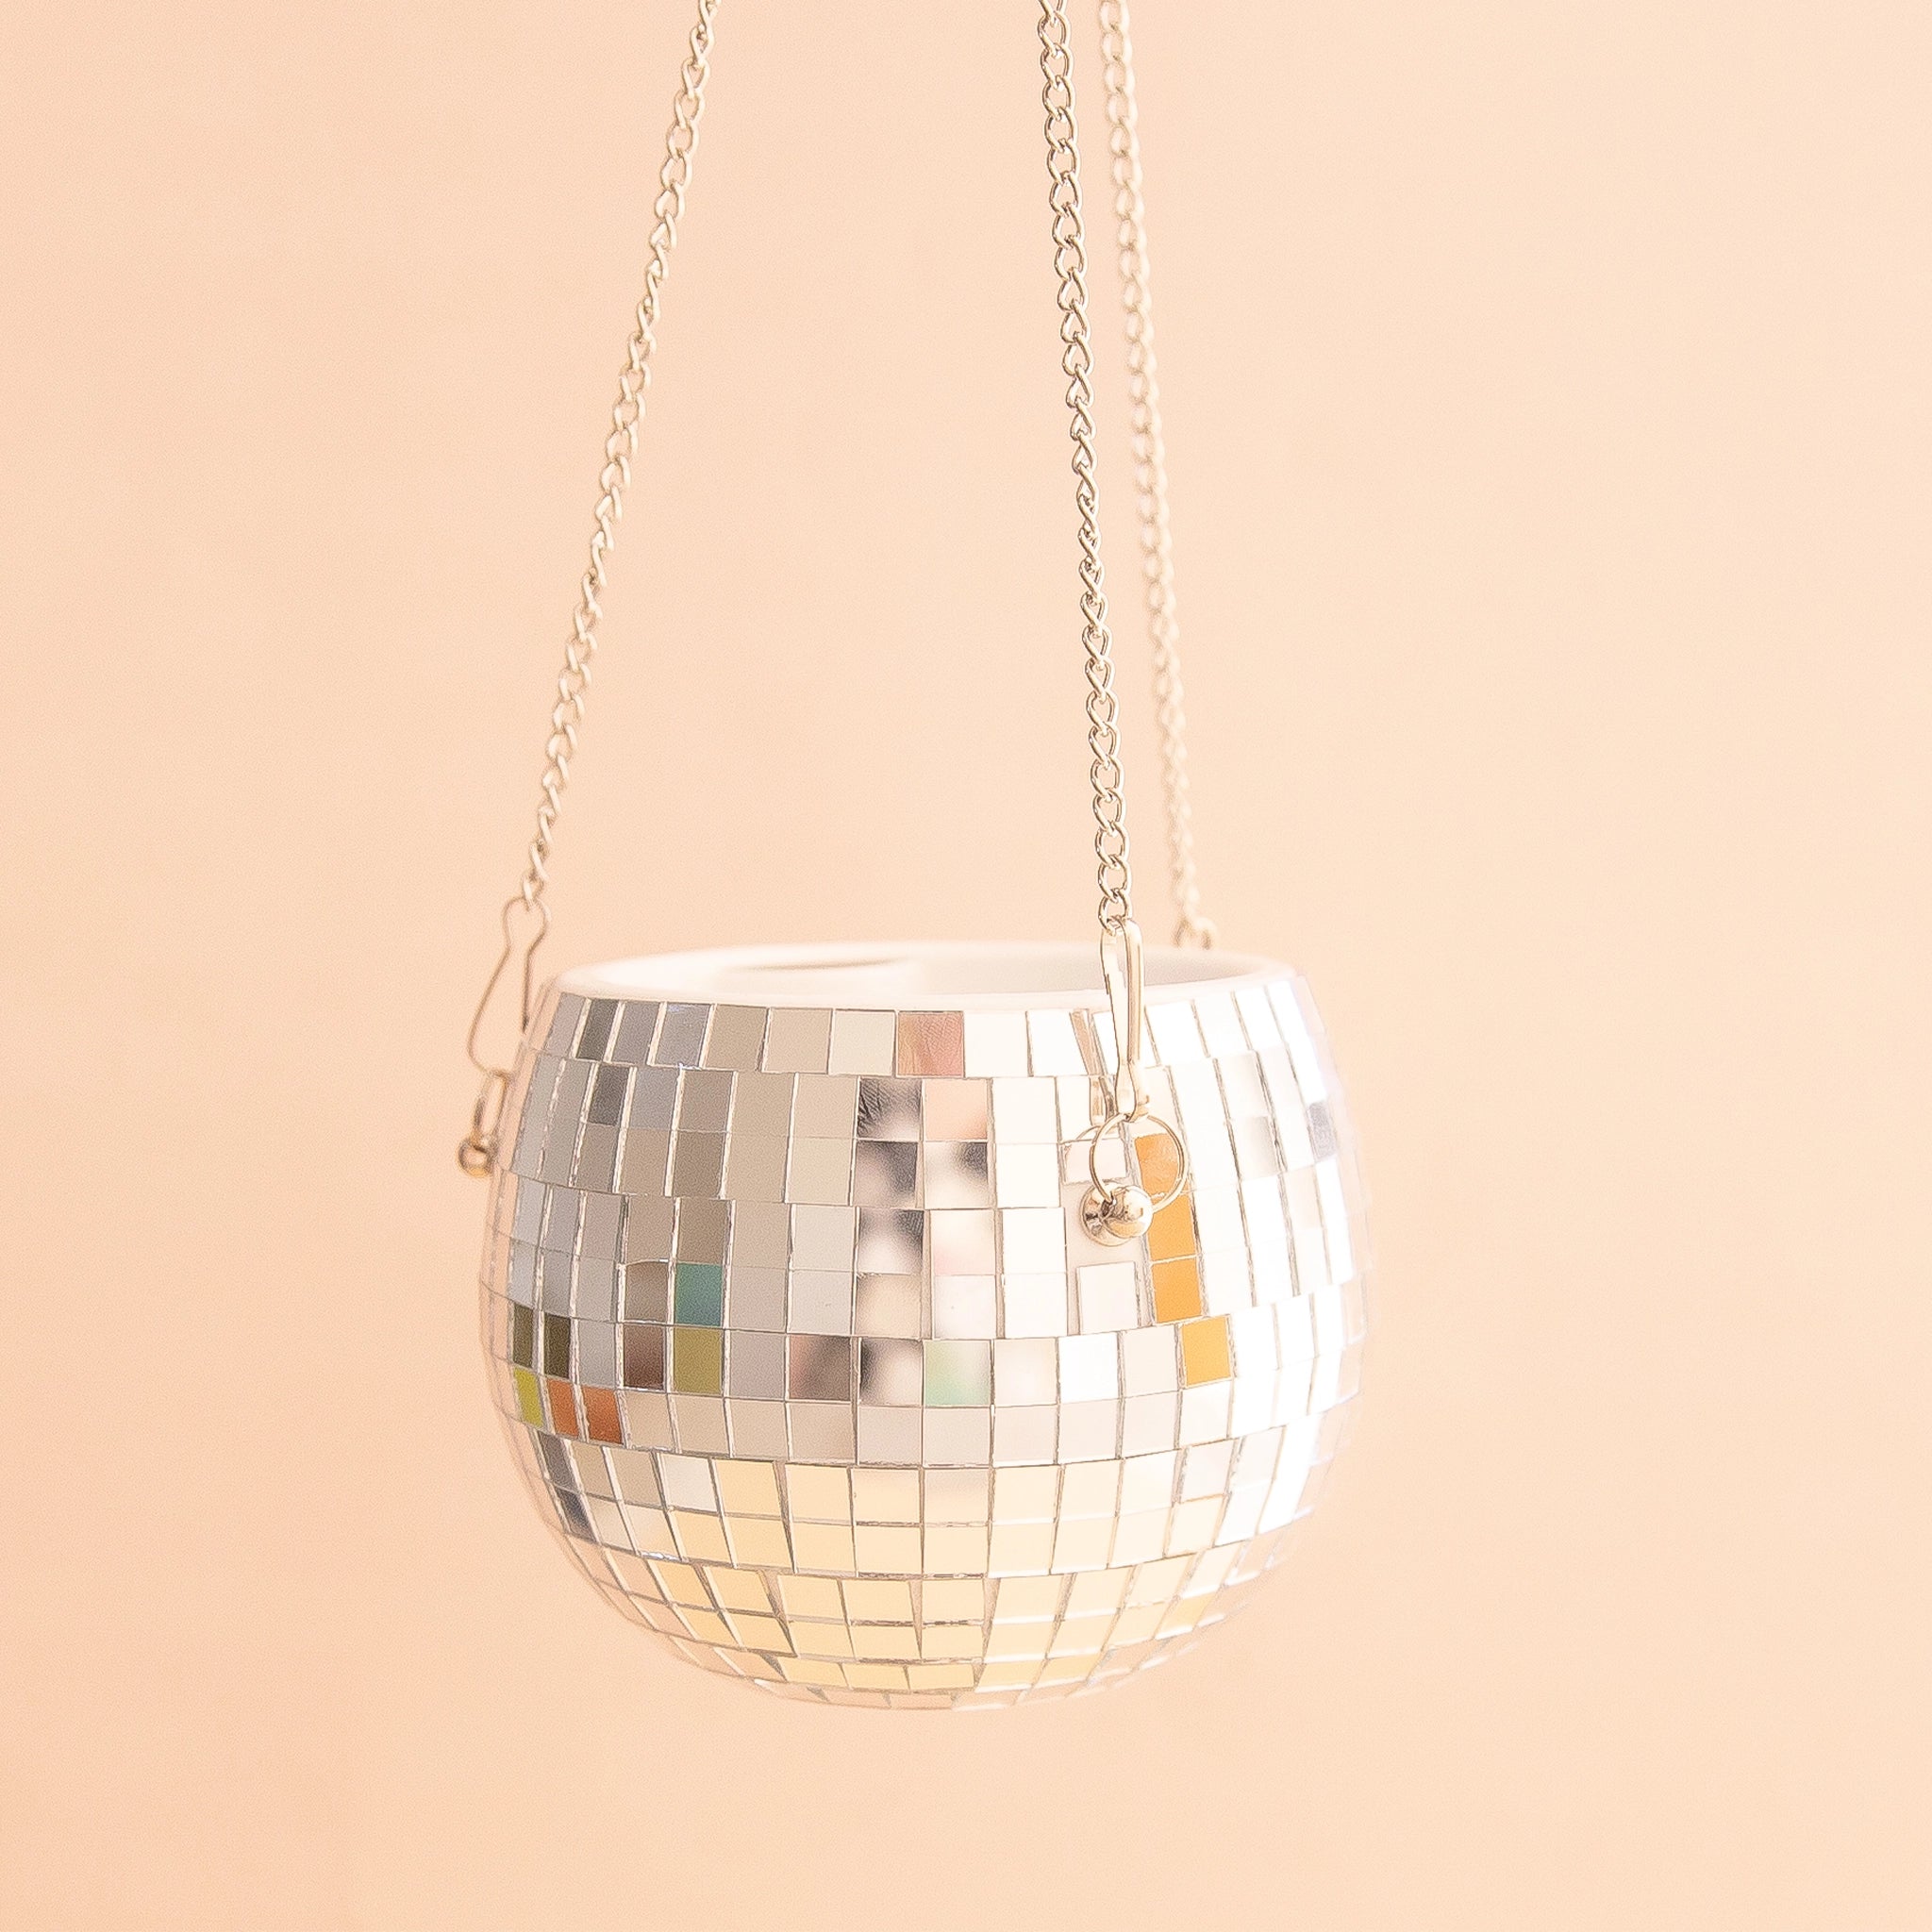 On a peachy background is a silver mirrored glass disco ball shaped planter with a silver chain hanger. 